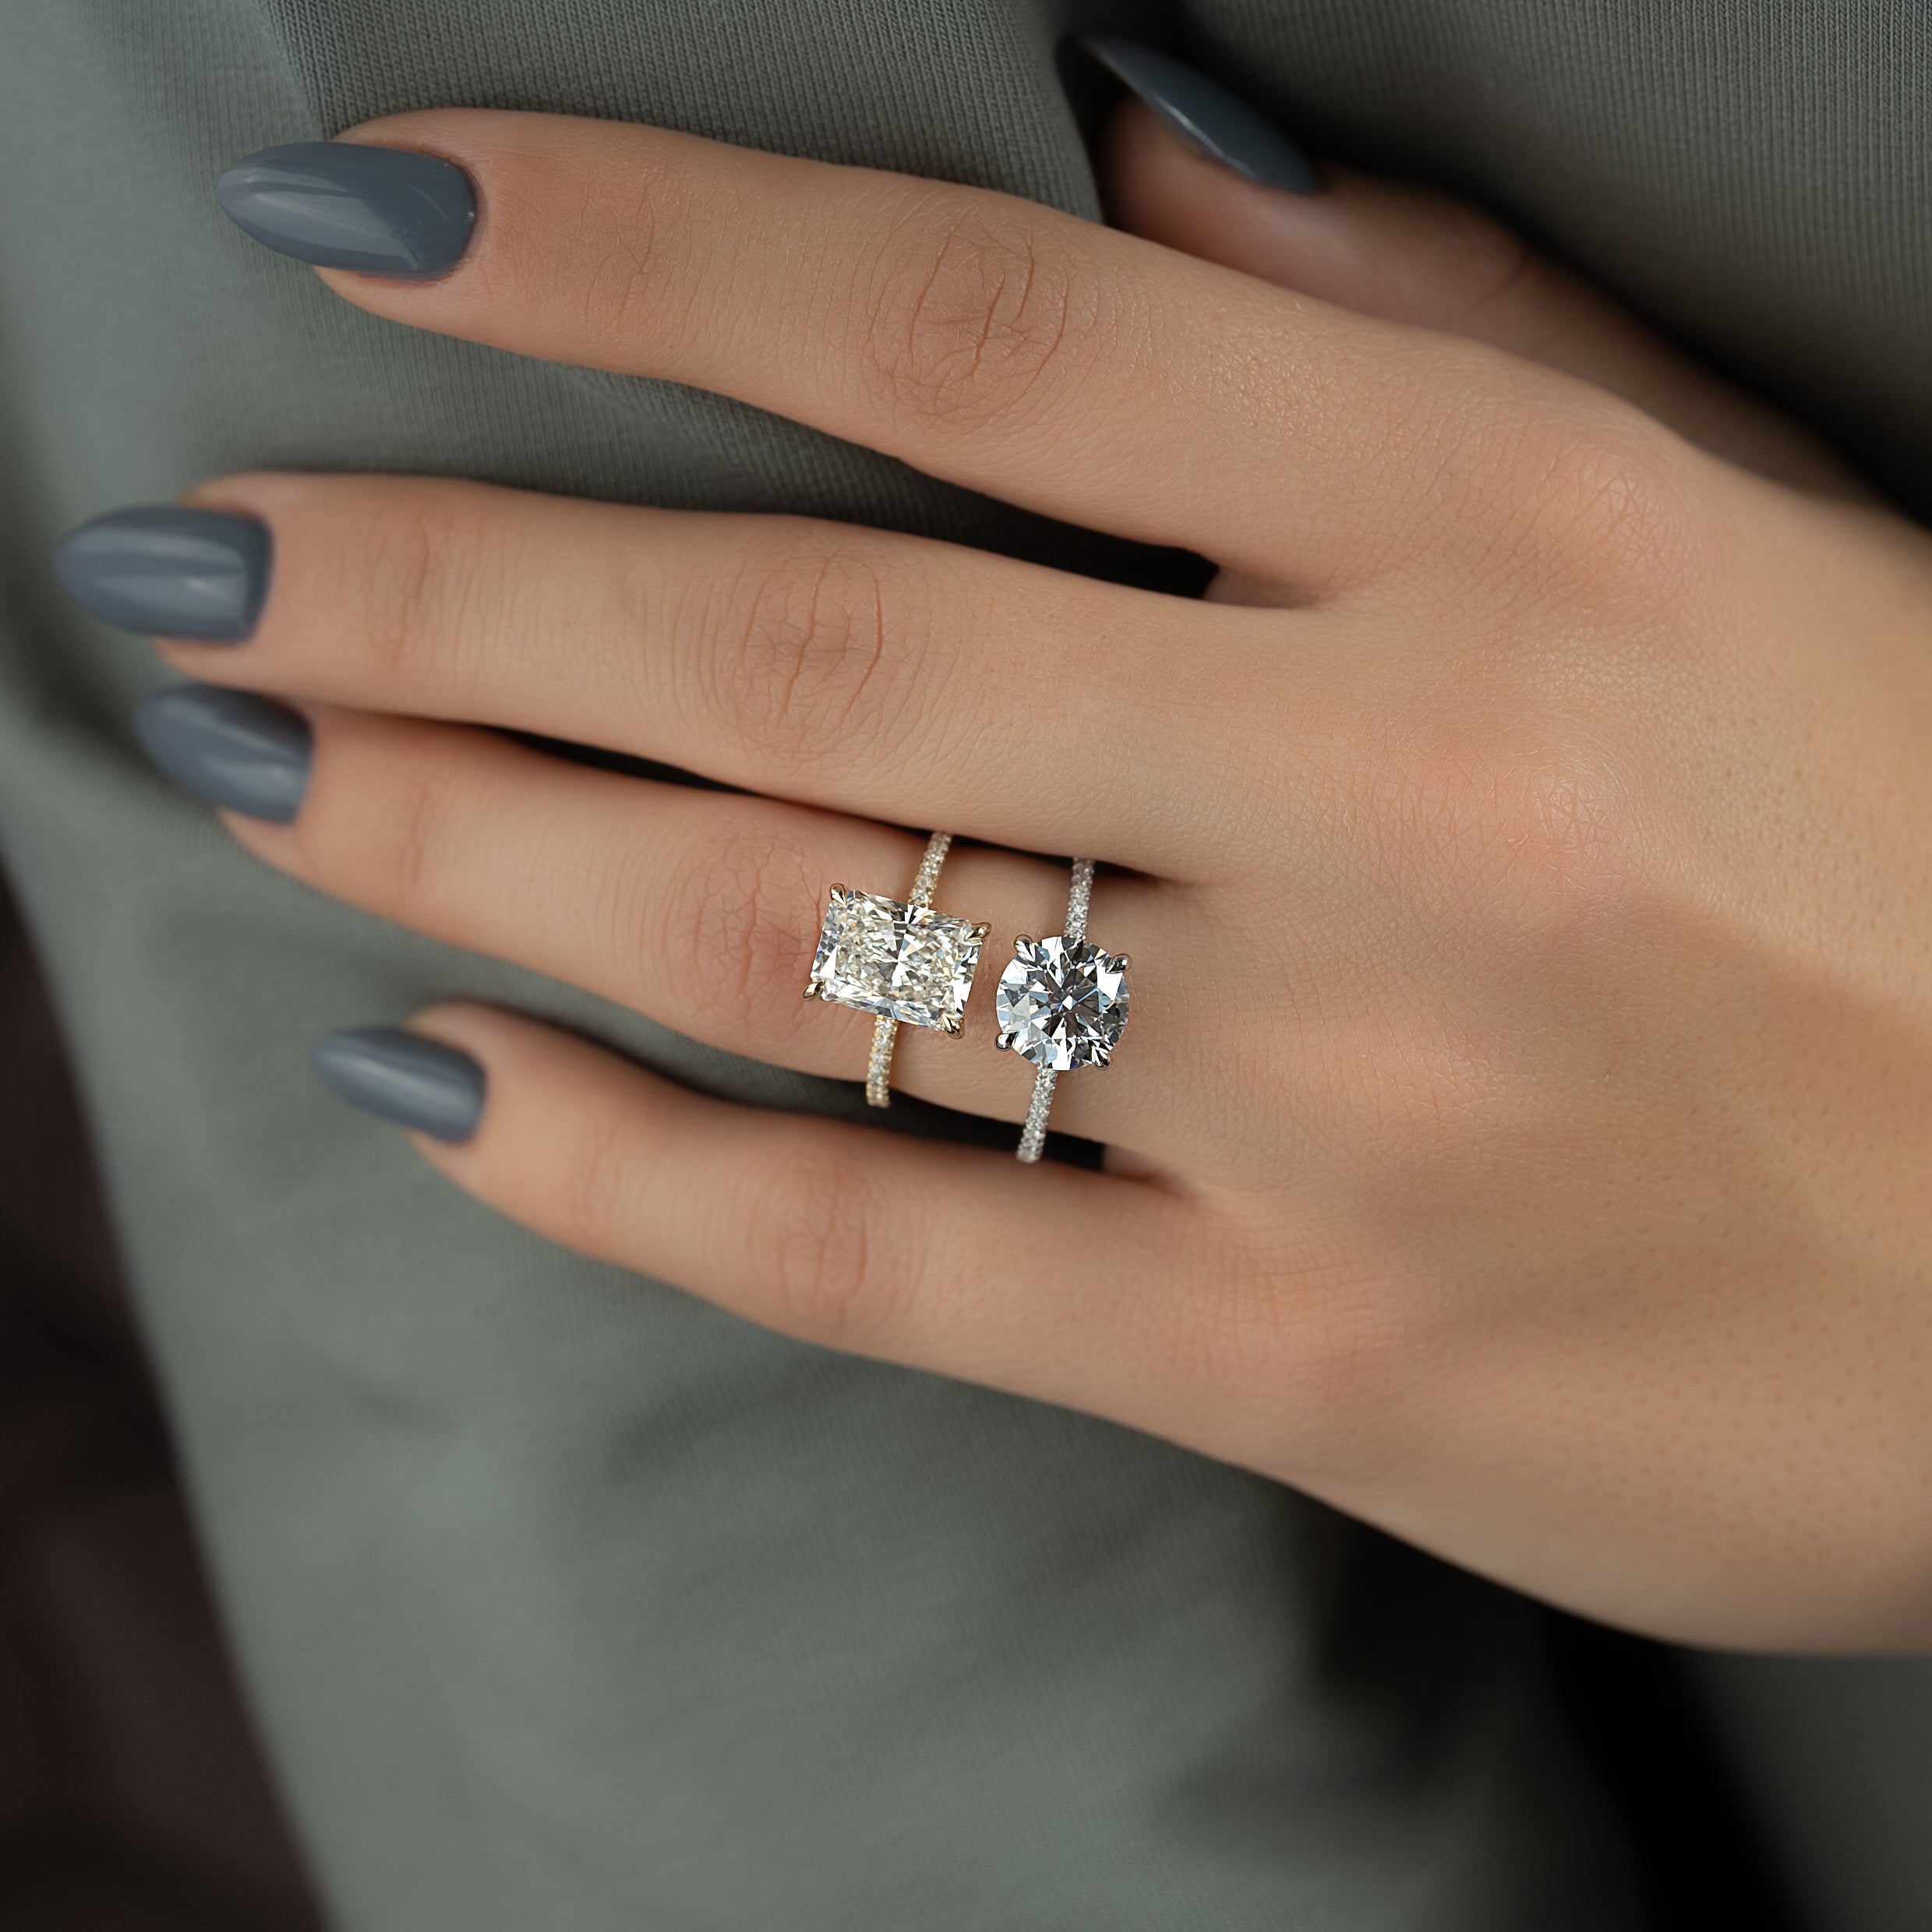 Round vs. Radiant Diamonds - Which One Sparkles More?